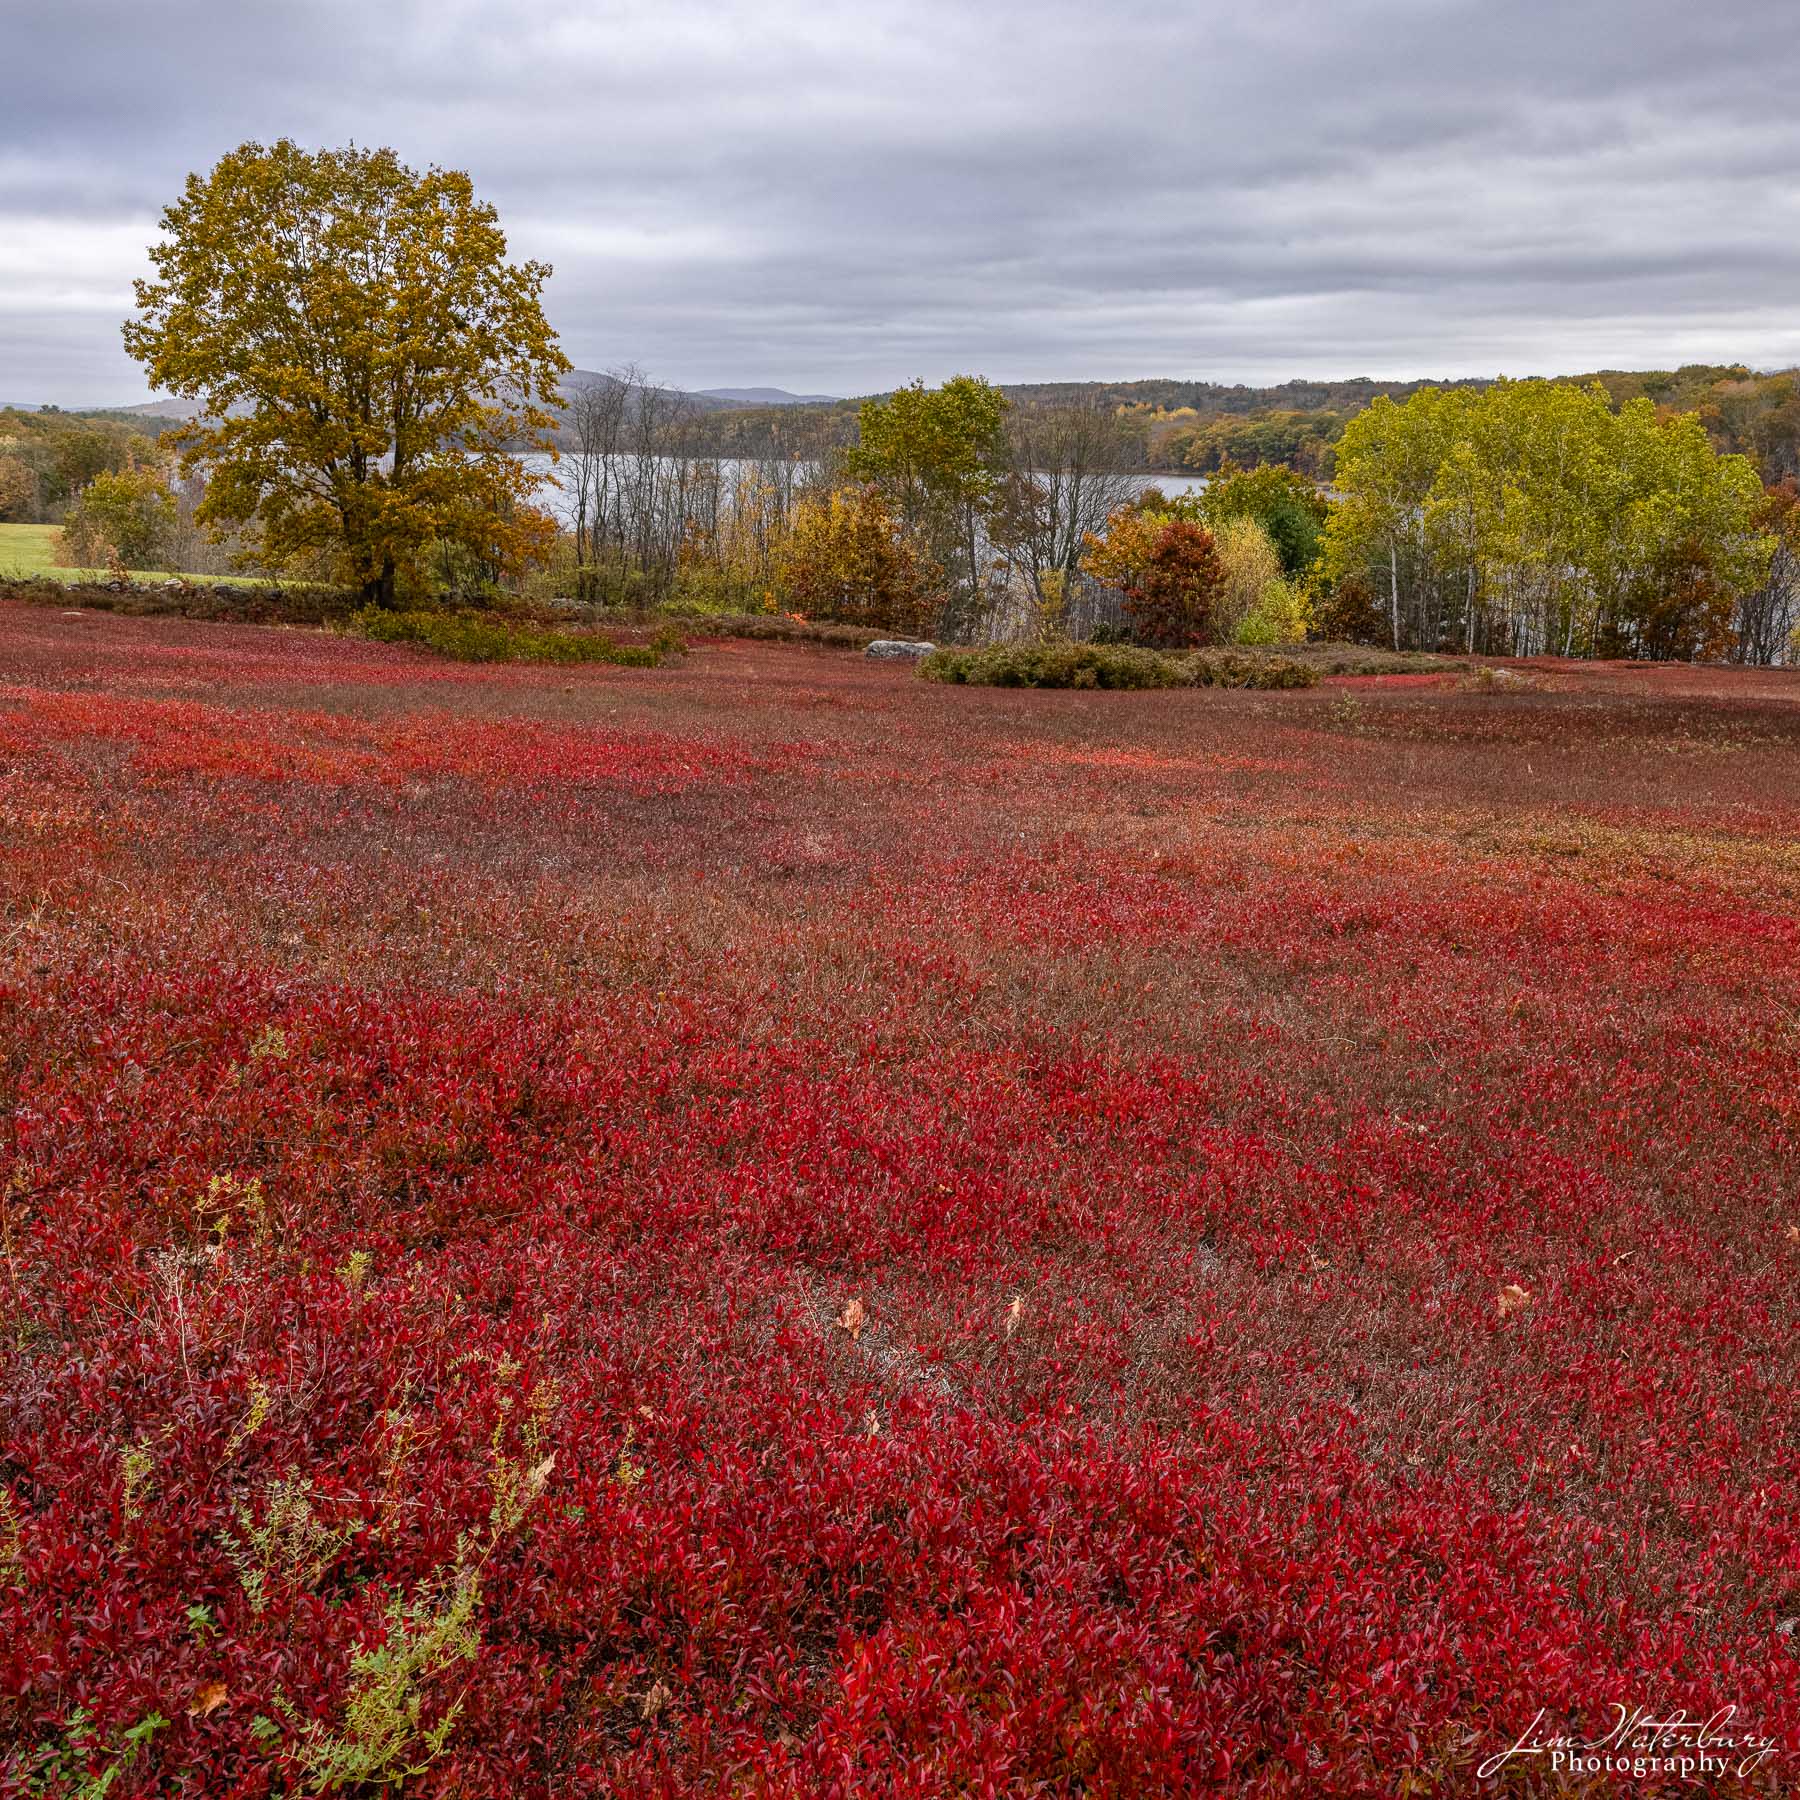 Blueberry fields, near Beth's Farm Market, on the road to Union, Me.